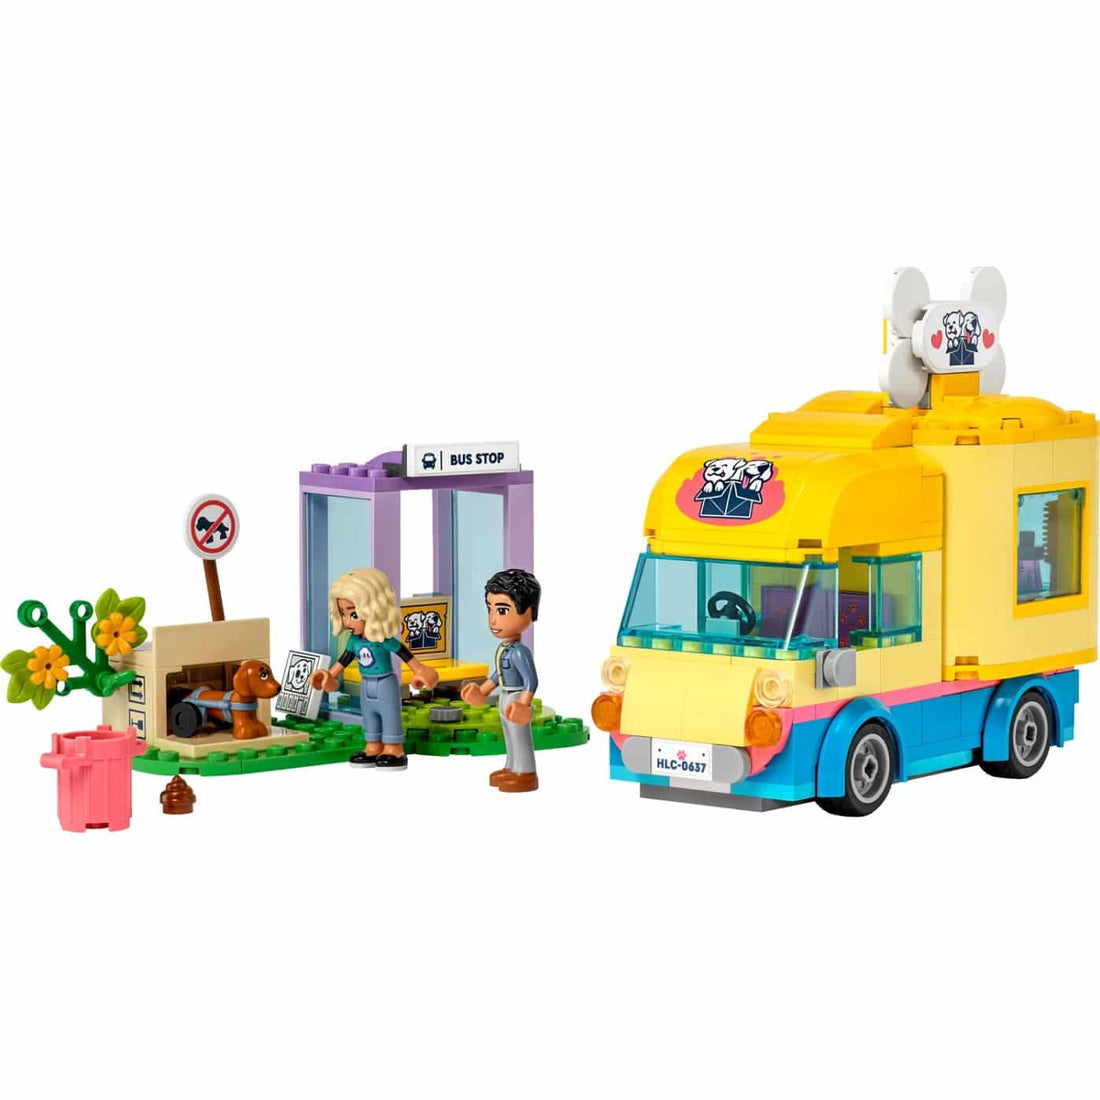 41741 Lego Friends Βανακι Διασωσης Σκυλων